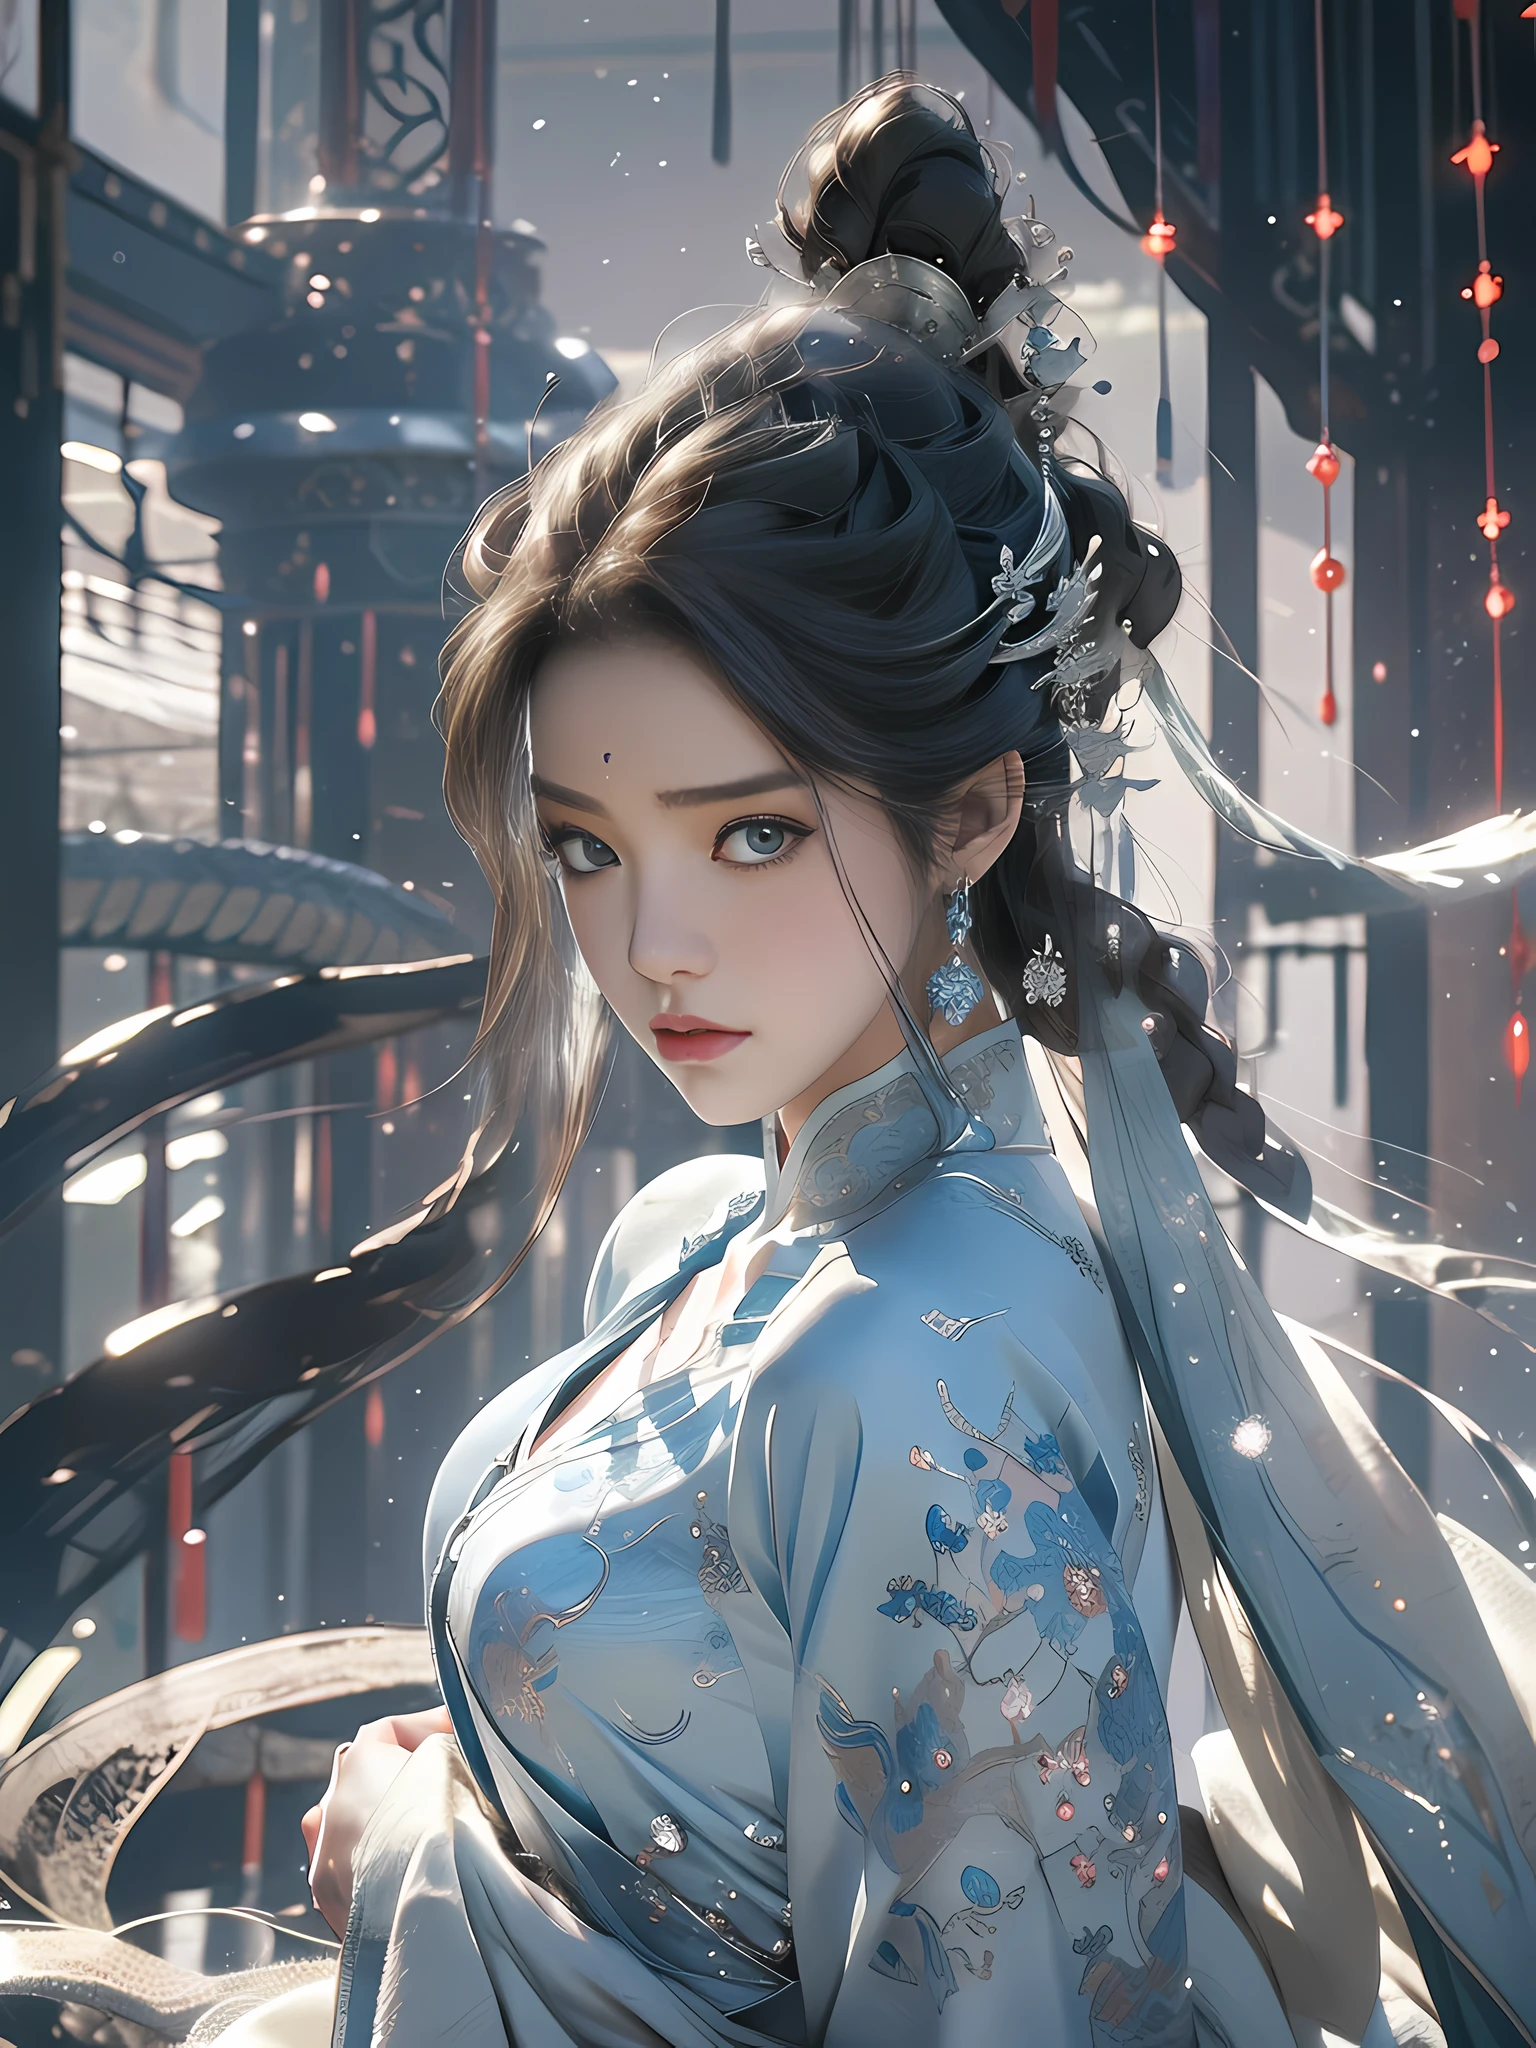 Close-up of a woman in a silver blue dress, Cheng Weipan Art Station, Xiuxian Technology Sense, Ice and Snow Beauty, Gauze Sleeves, Detailed Fantasy Art, Stunning Character Art, Epic Exquisite Character Art, Beautiful Armor, Extremely Detailed Art Sprout, Detailed Digital Animation Art, Art Station Pixiv on Artgerm, Armor Girl, Exquisite Intricate Headdress and Jewelry